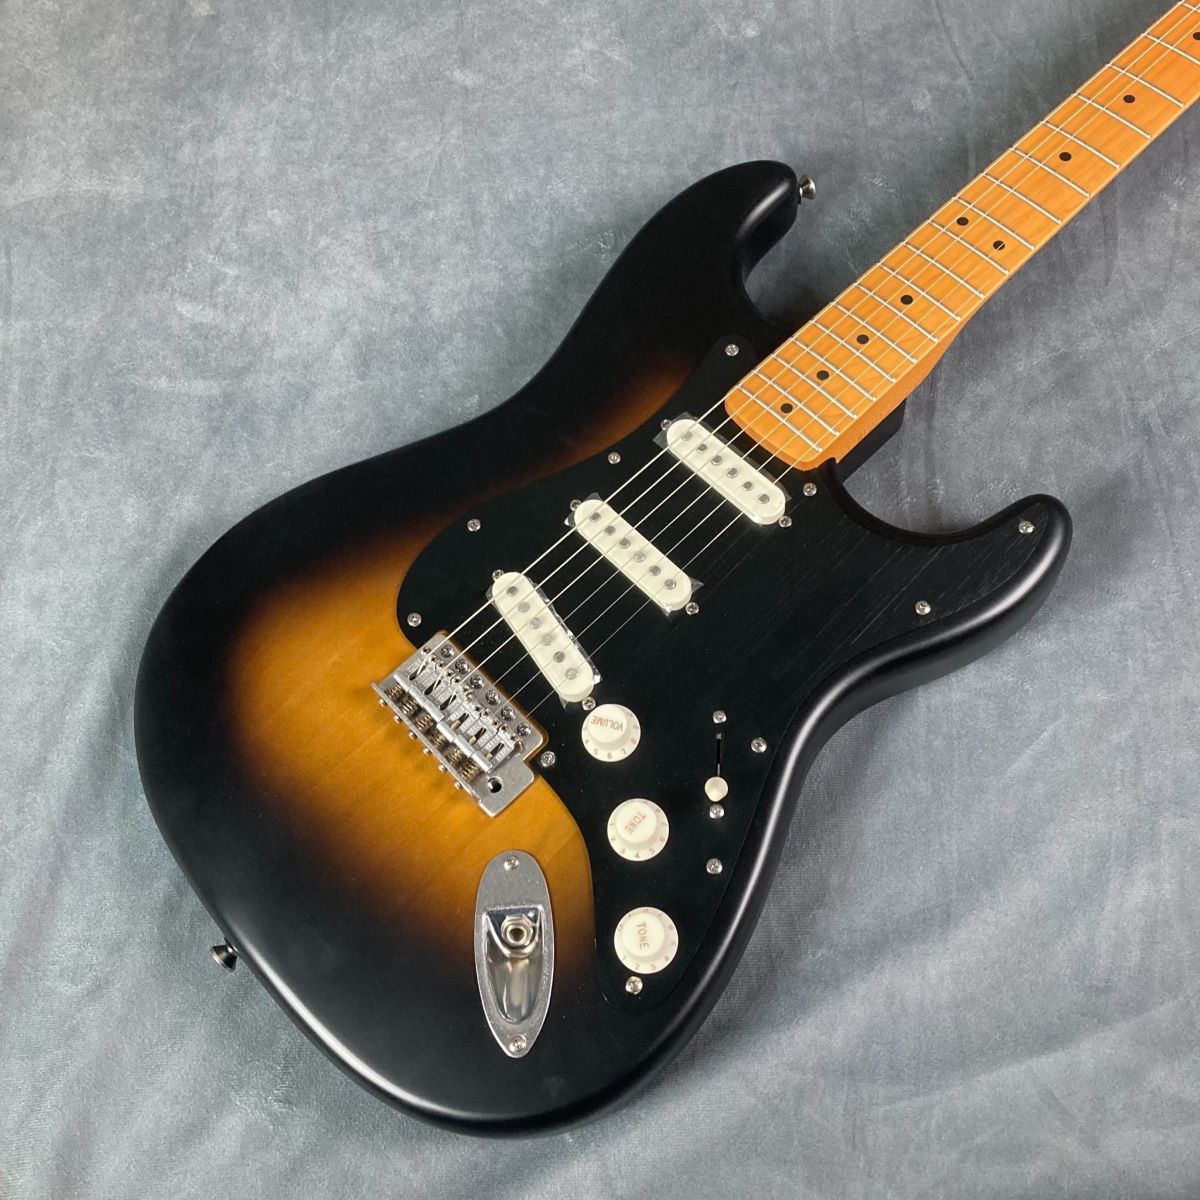 Squier by Fender 40th Anniversary Stratocaster Vintage Edition ...